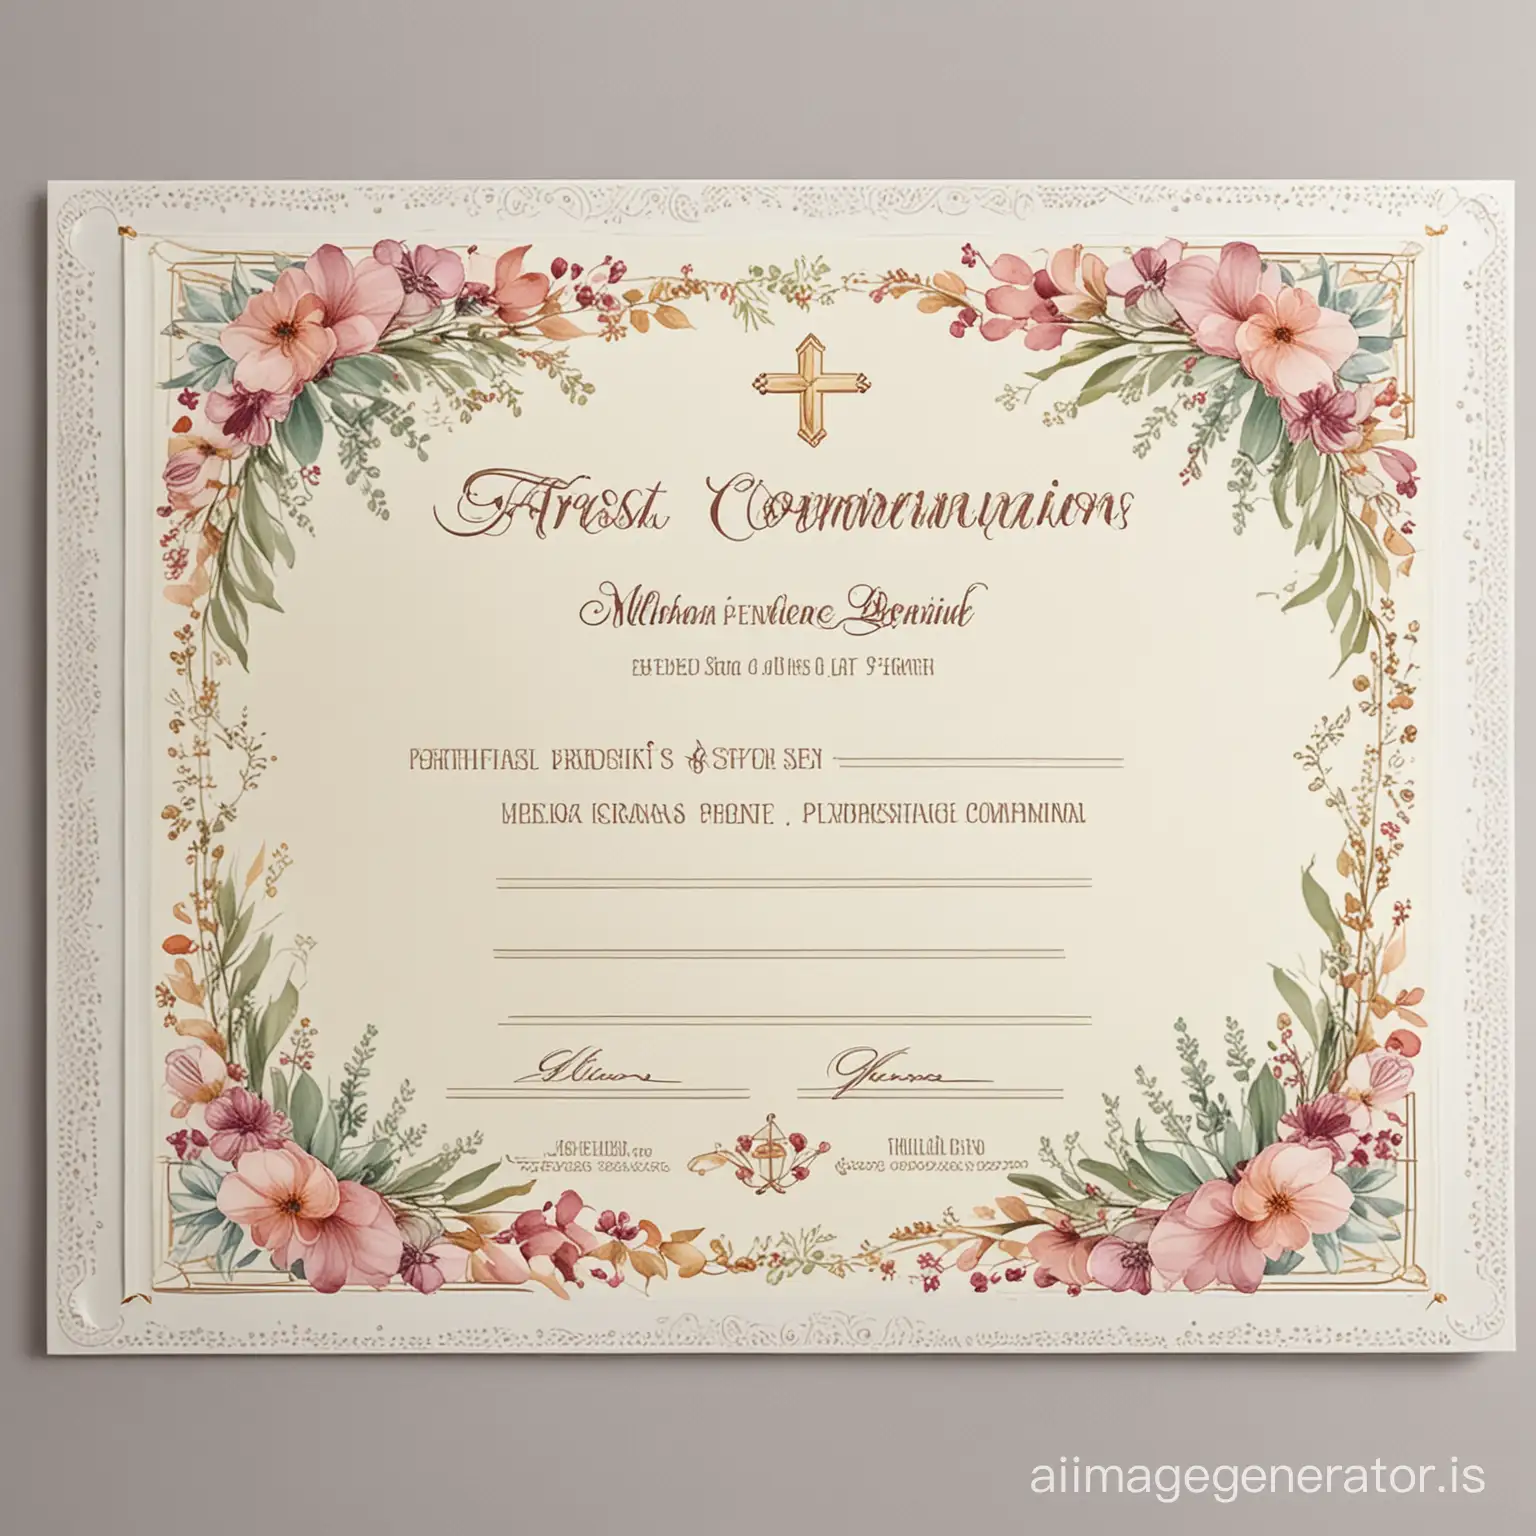 FIRST COMMUNION CERTIFICATE FLORAL DESIGN WITH GEOMETRICAL BORDERS